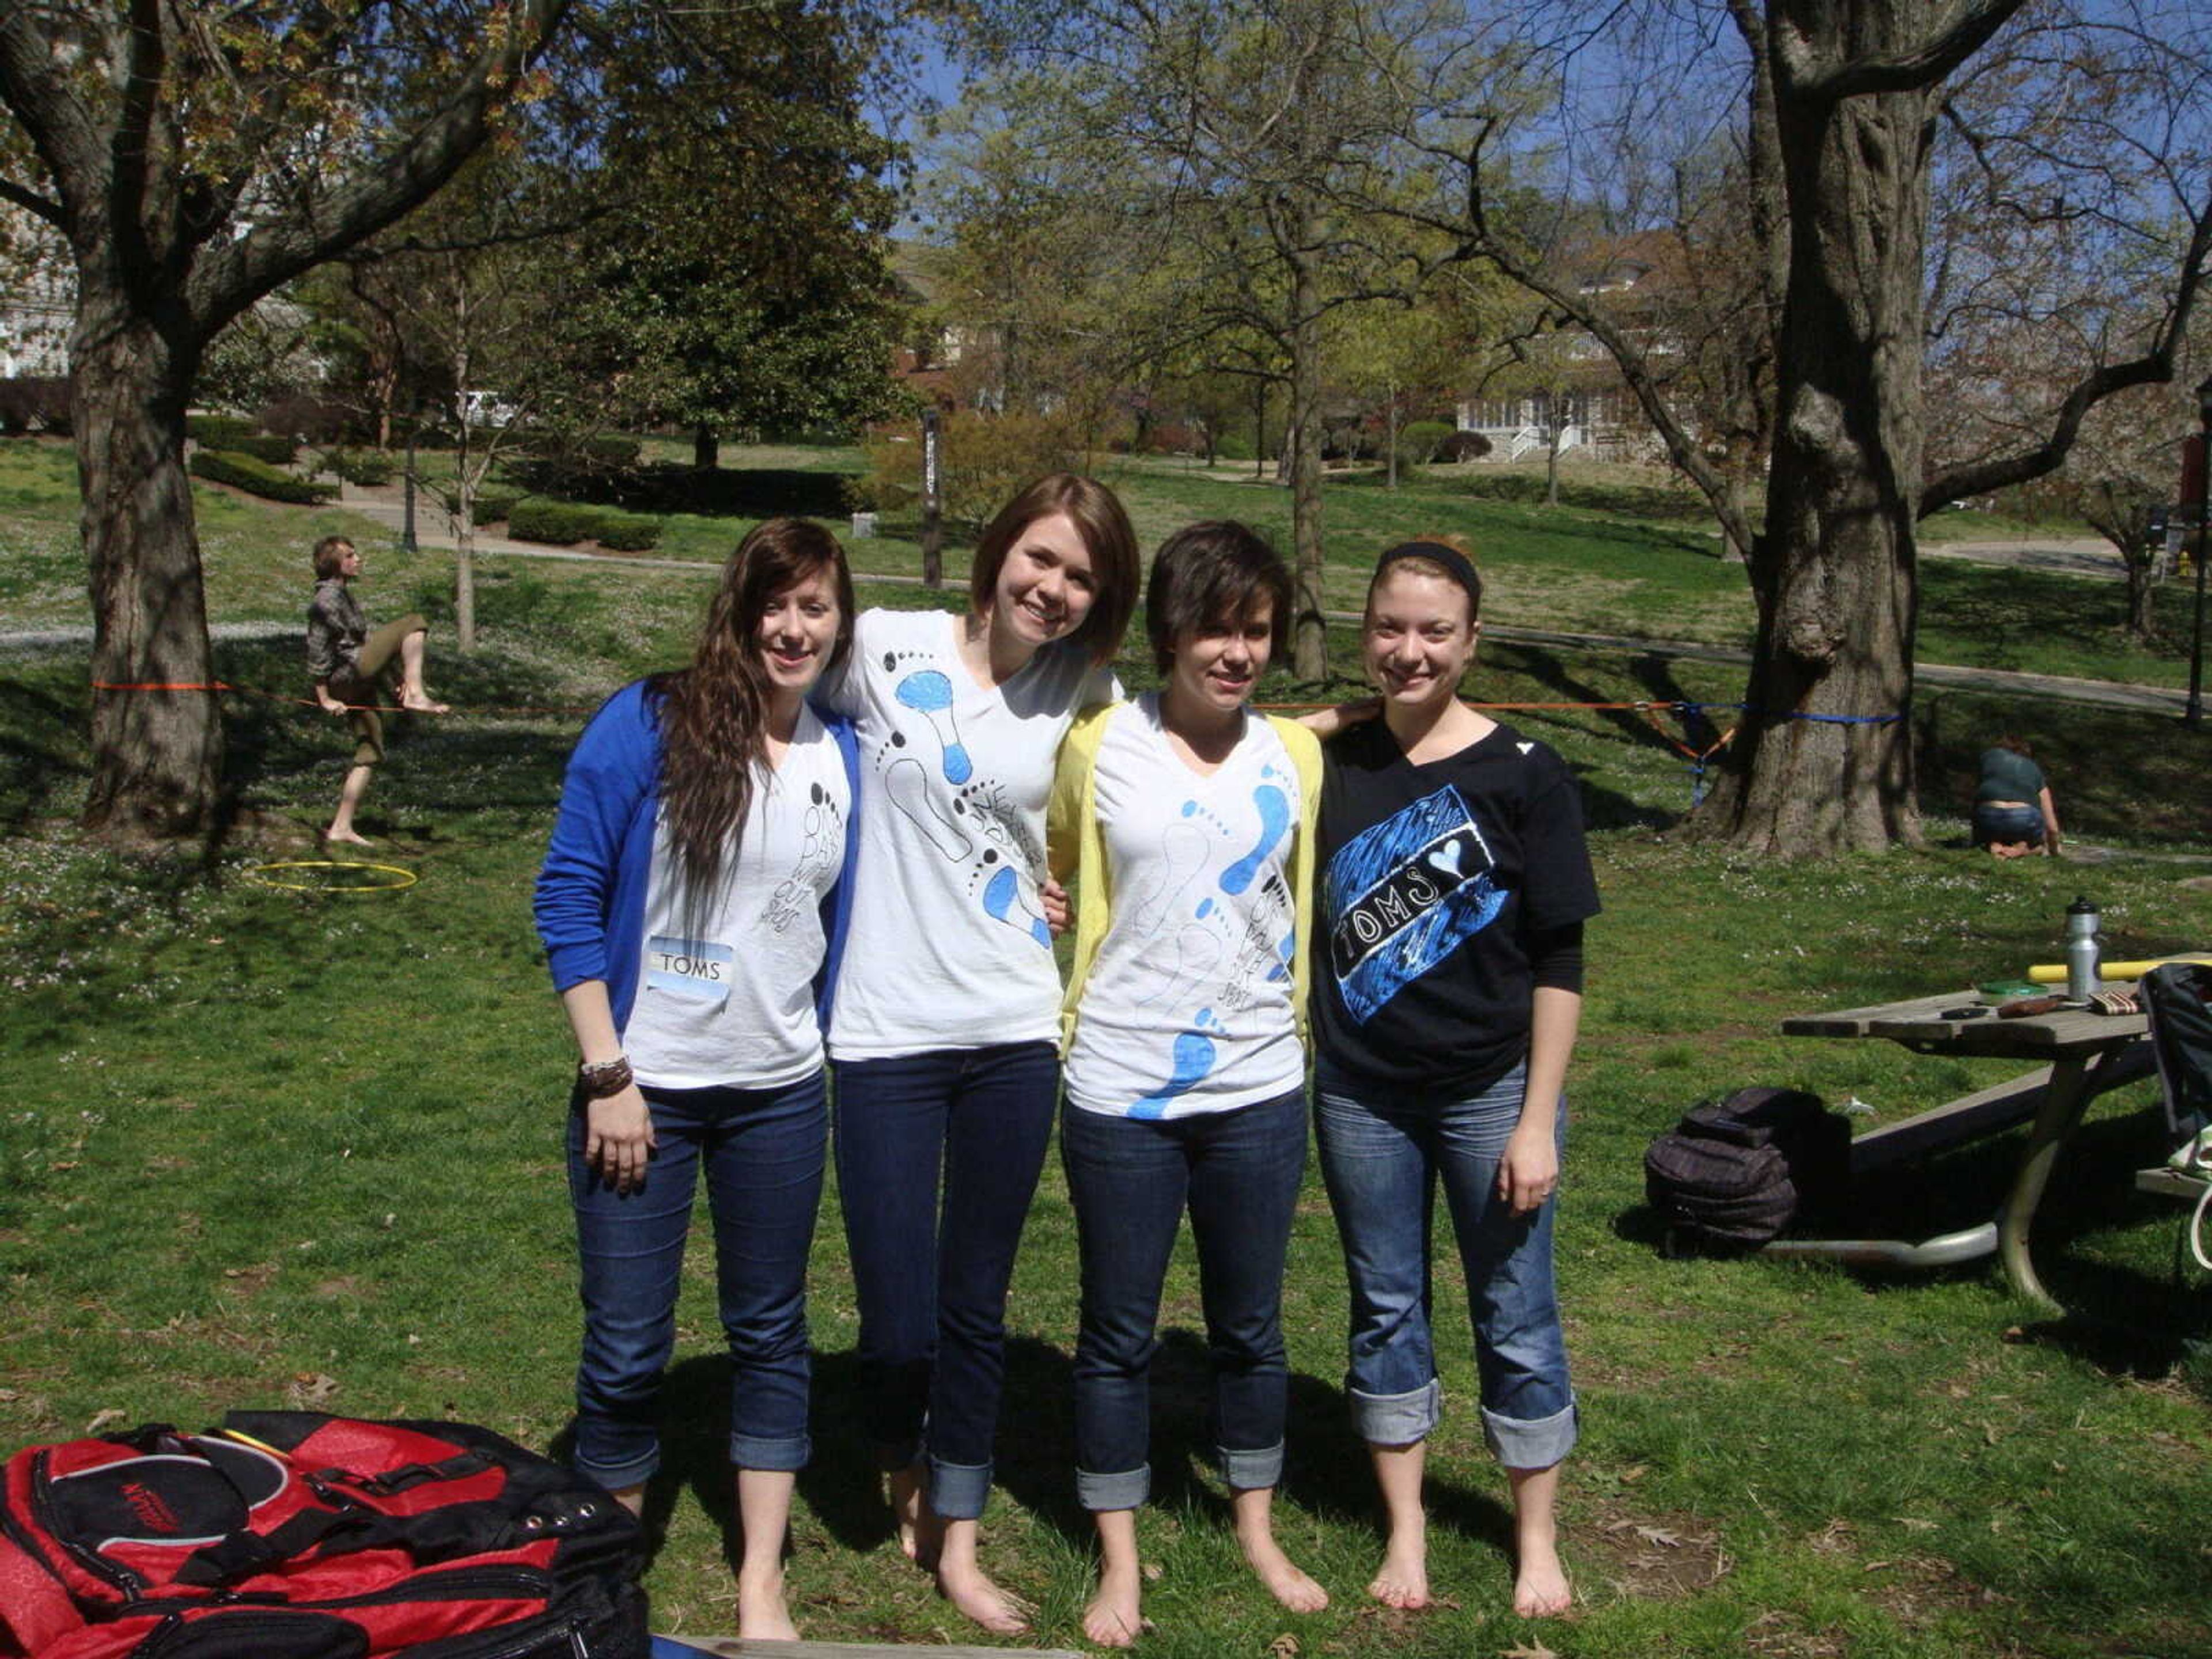 Robin Aston, Emily Ehrenstrom, Jessica Buettner, and Shinea Farrell at "One Day Without Shoes" on April 5 2011 (picture from Toms on Campus)